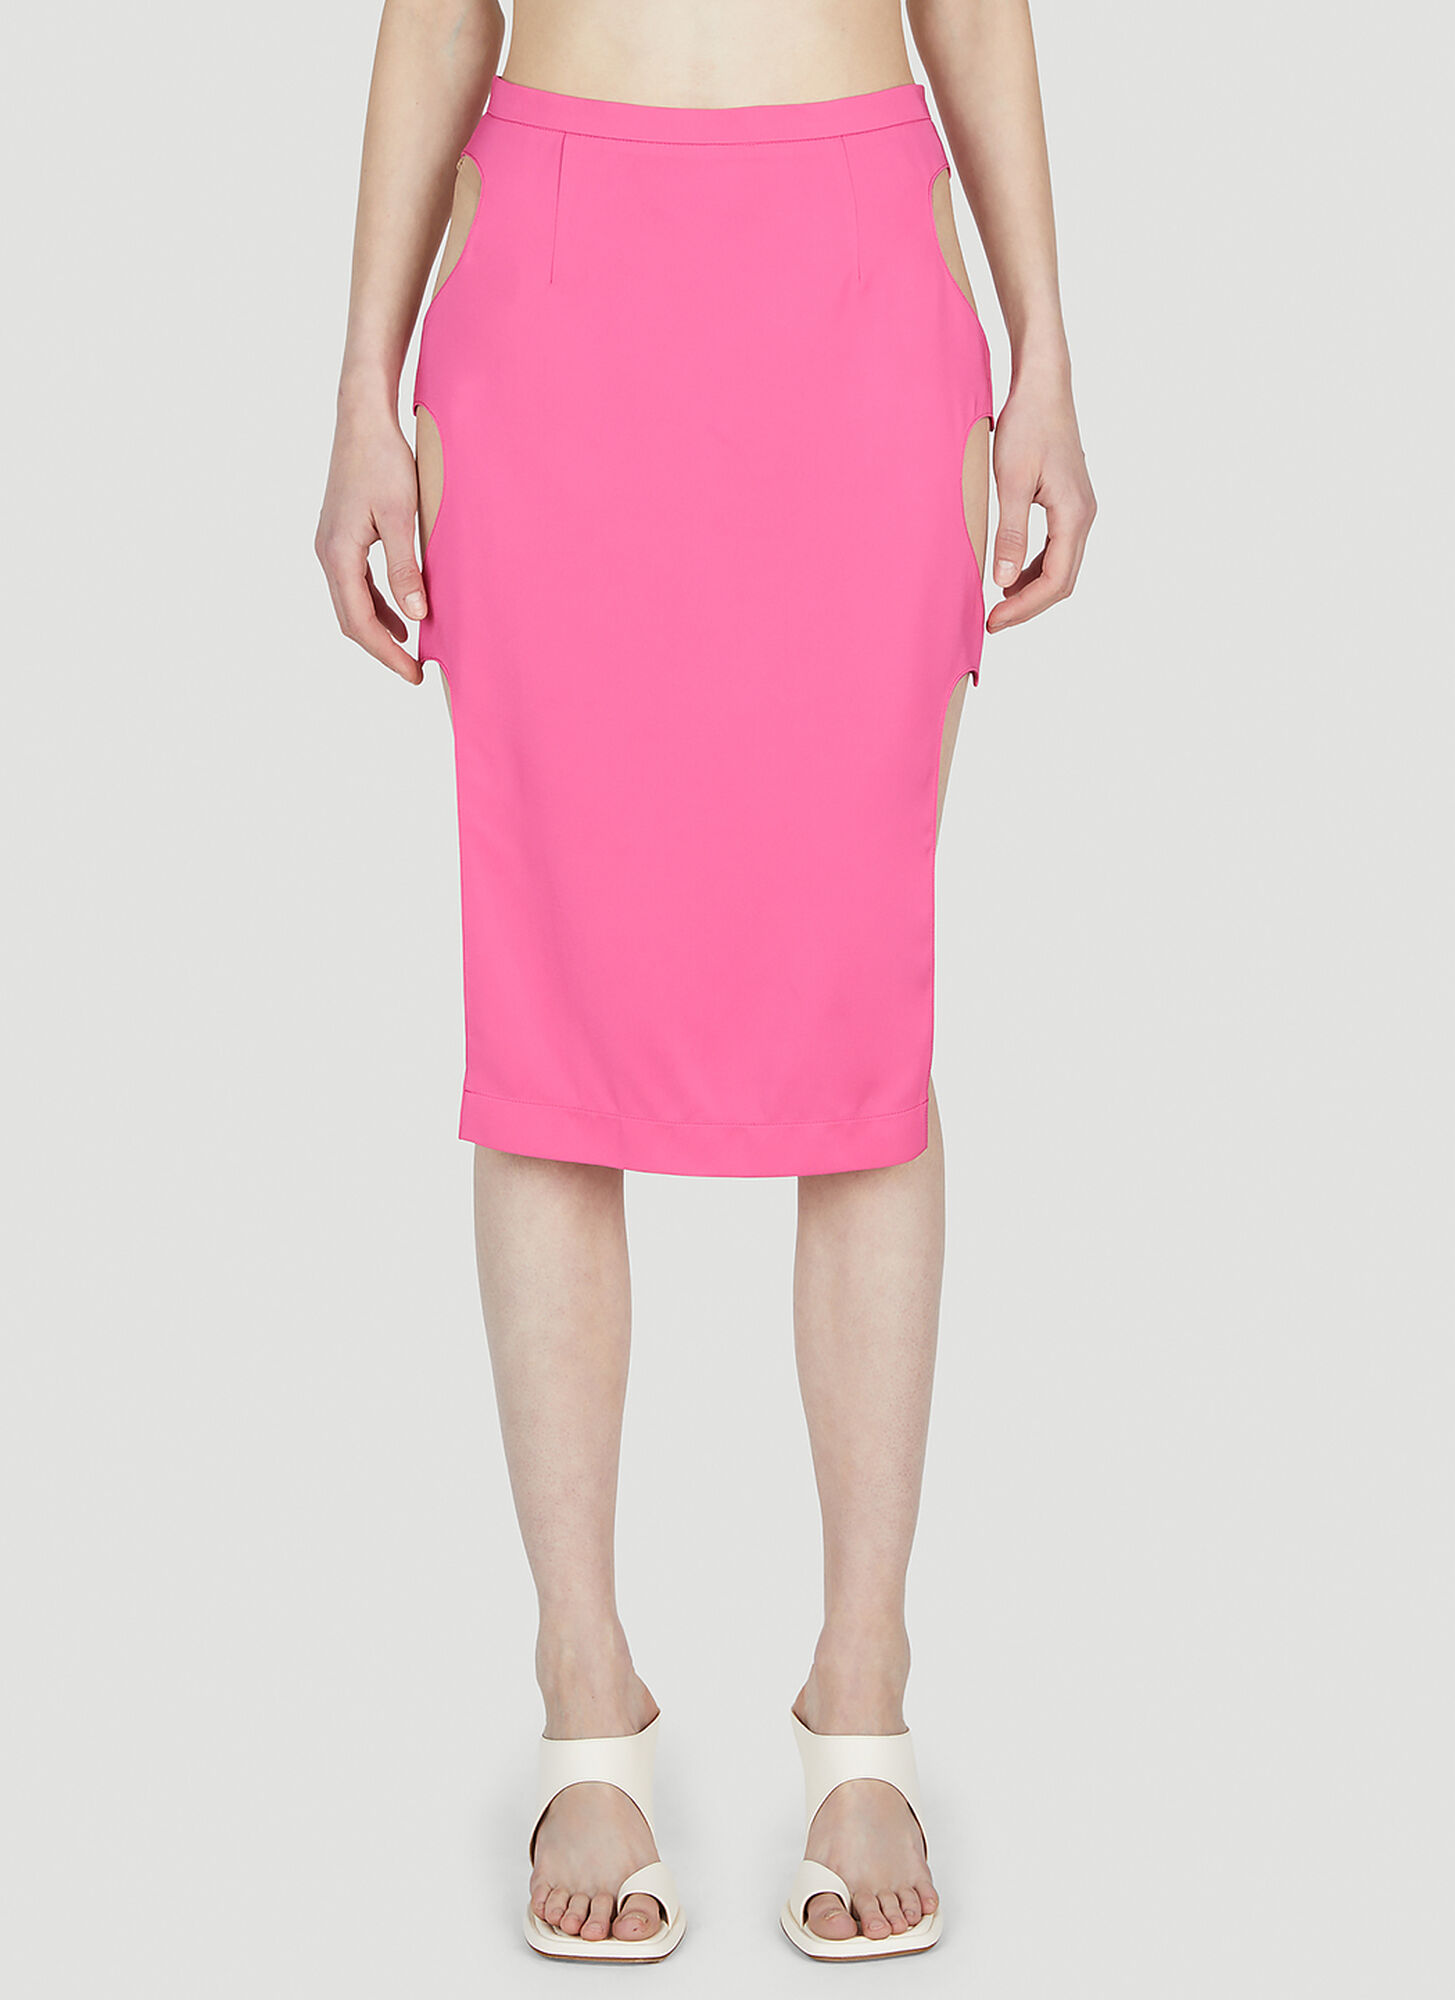 Marco Rambaldi Cut Out Skirt In Pink